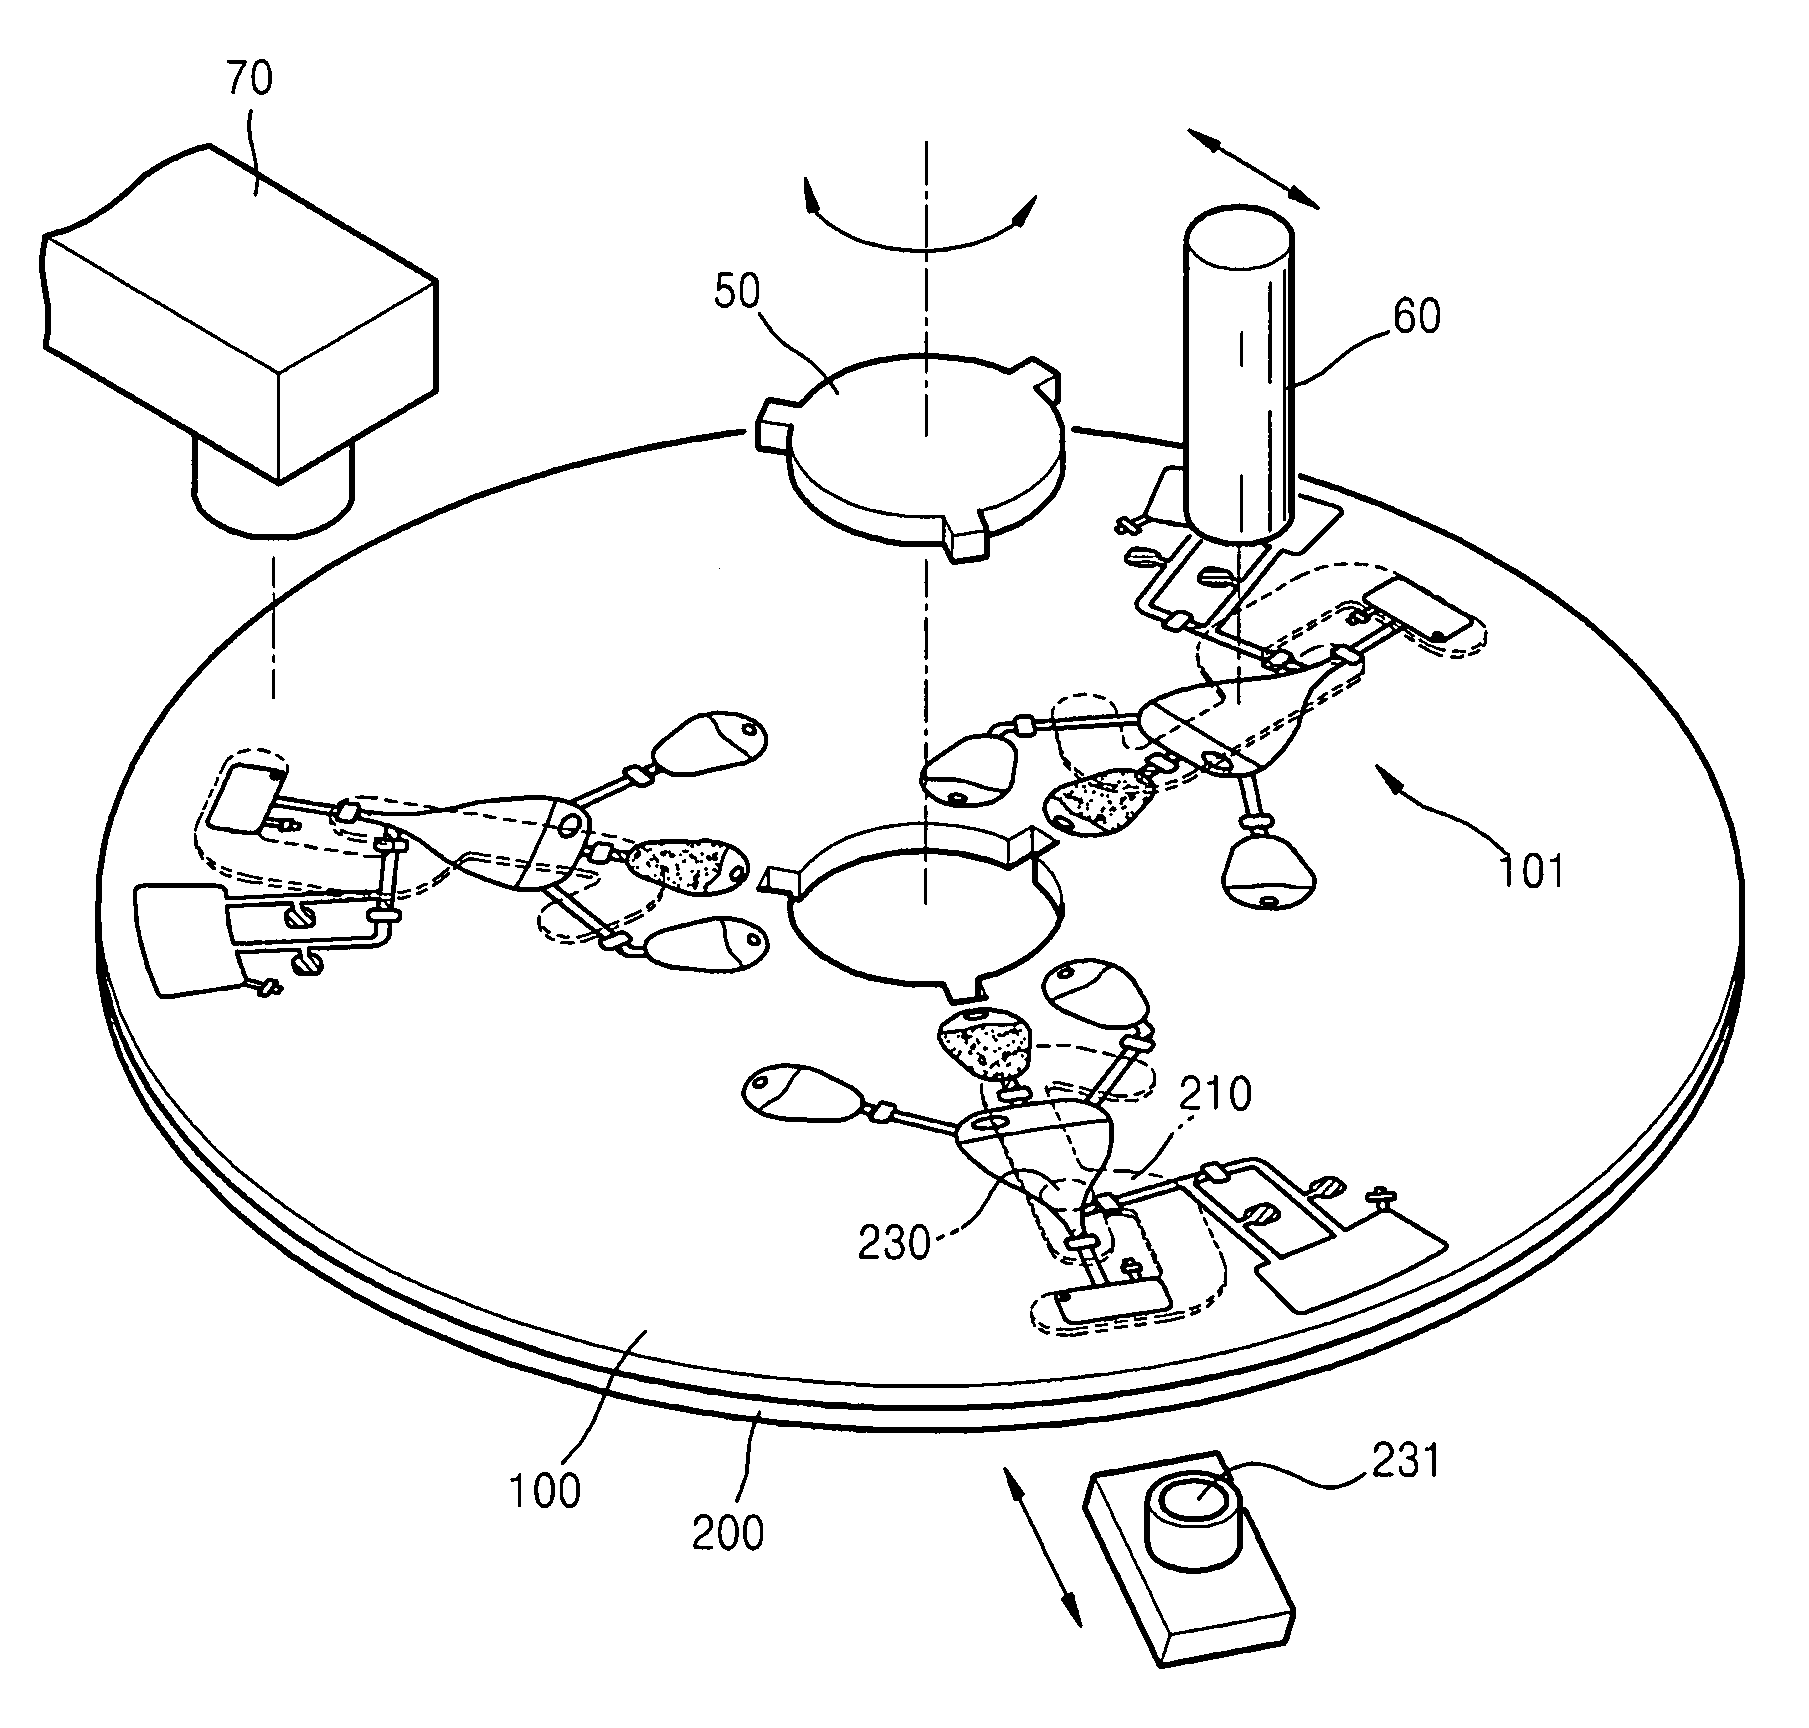 Centrifugal force-based microfluidic device for protein detection and microfluidic system including the same